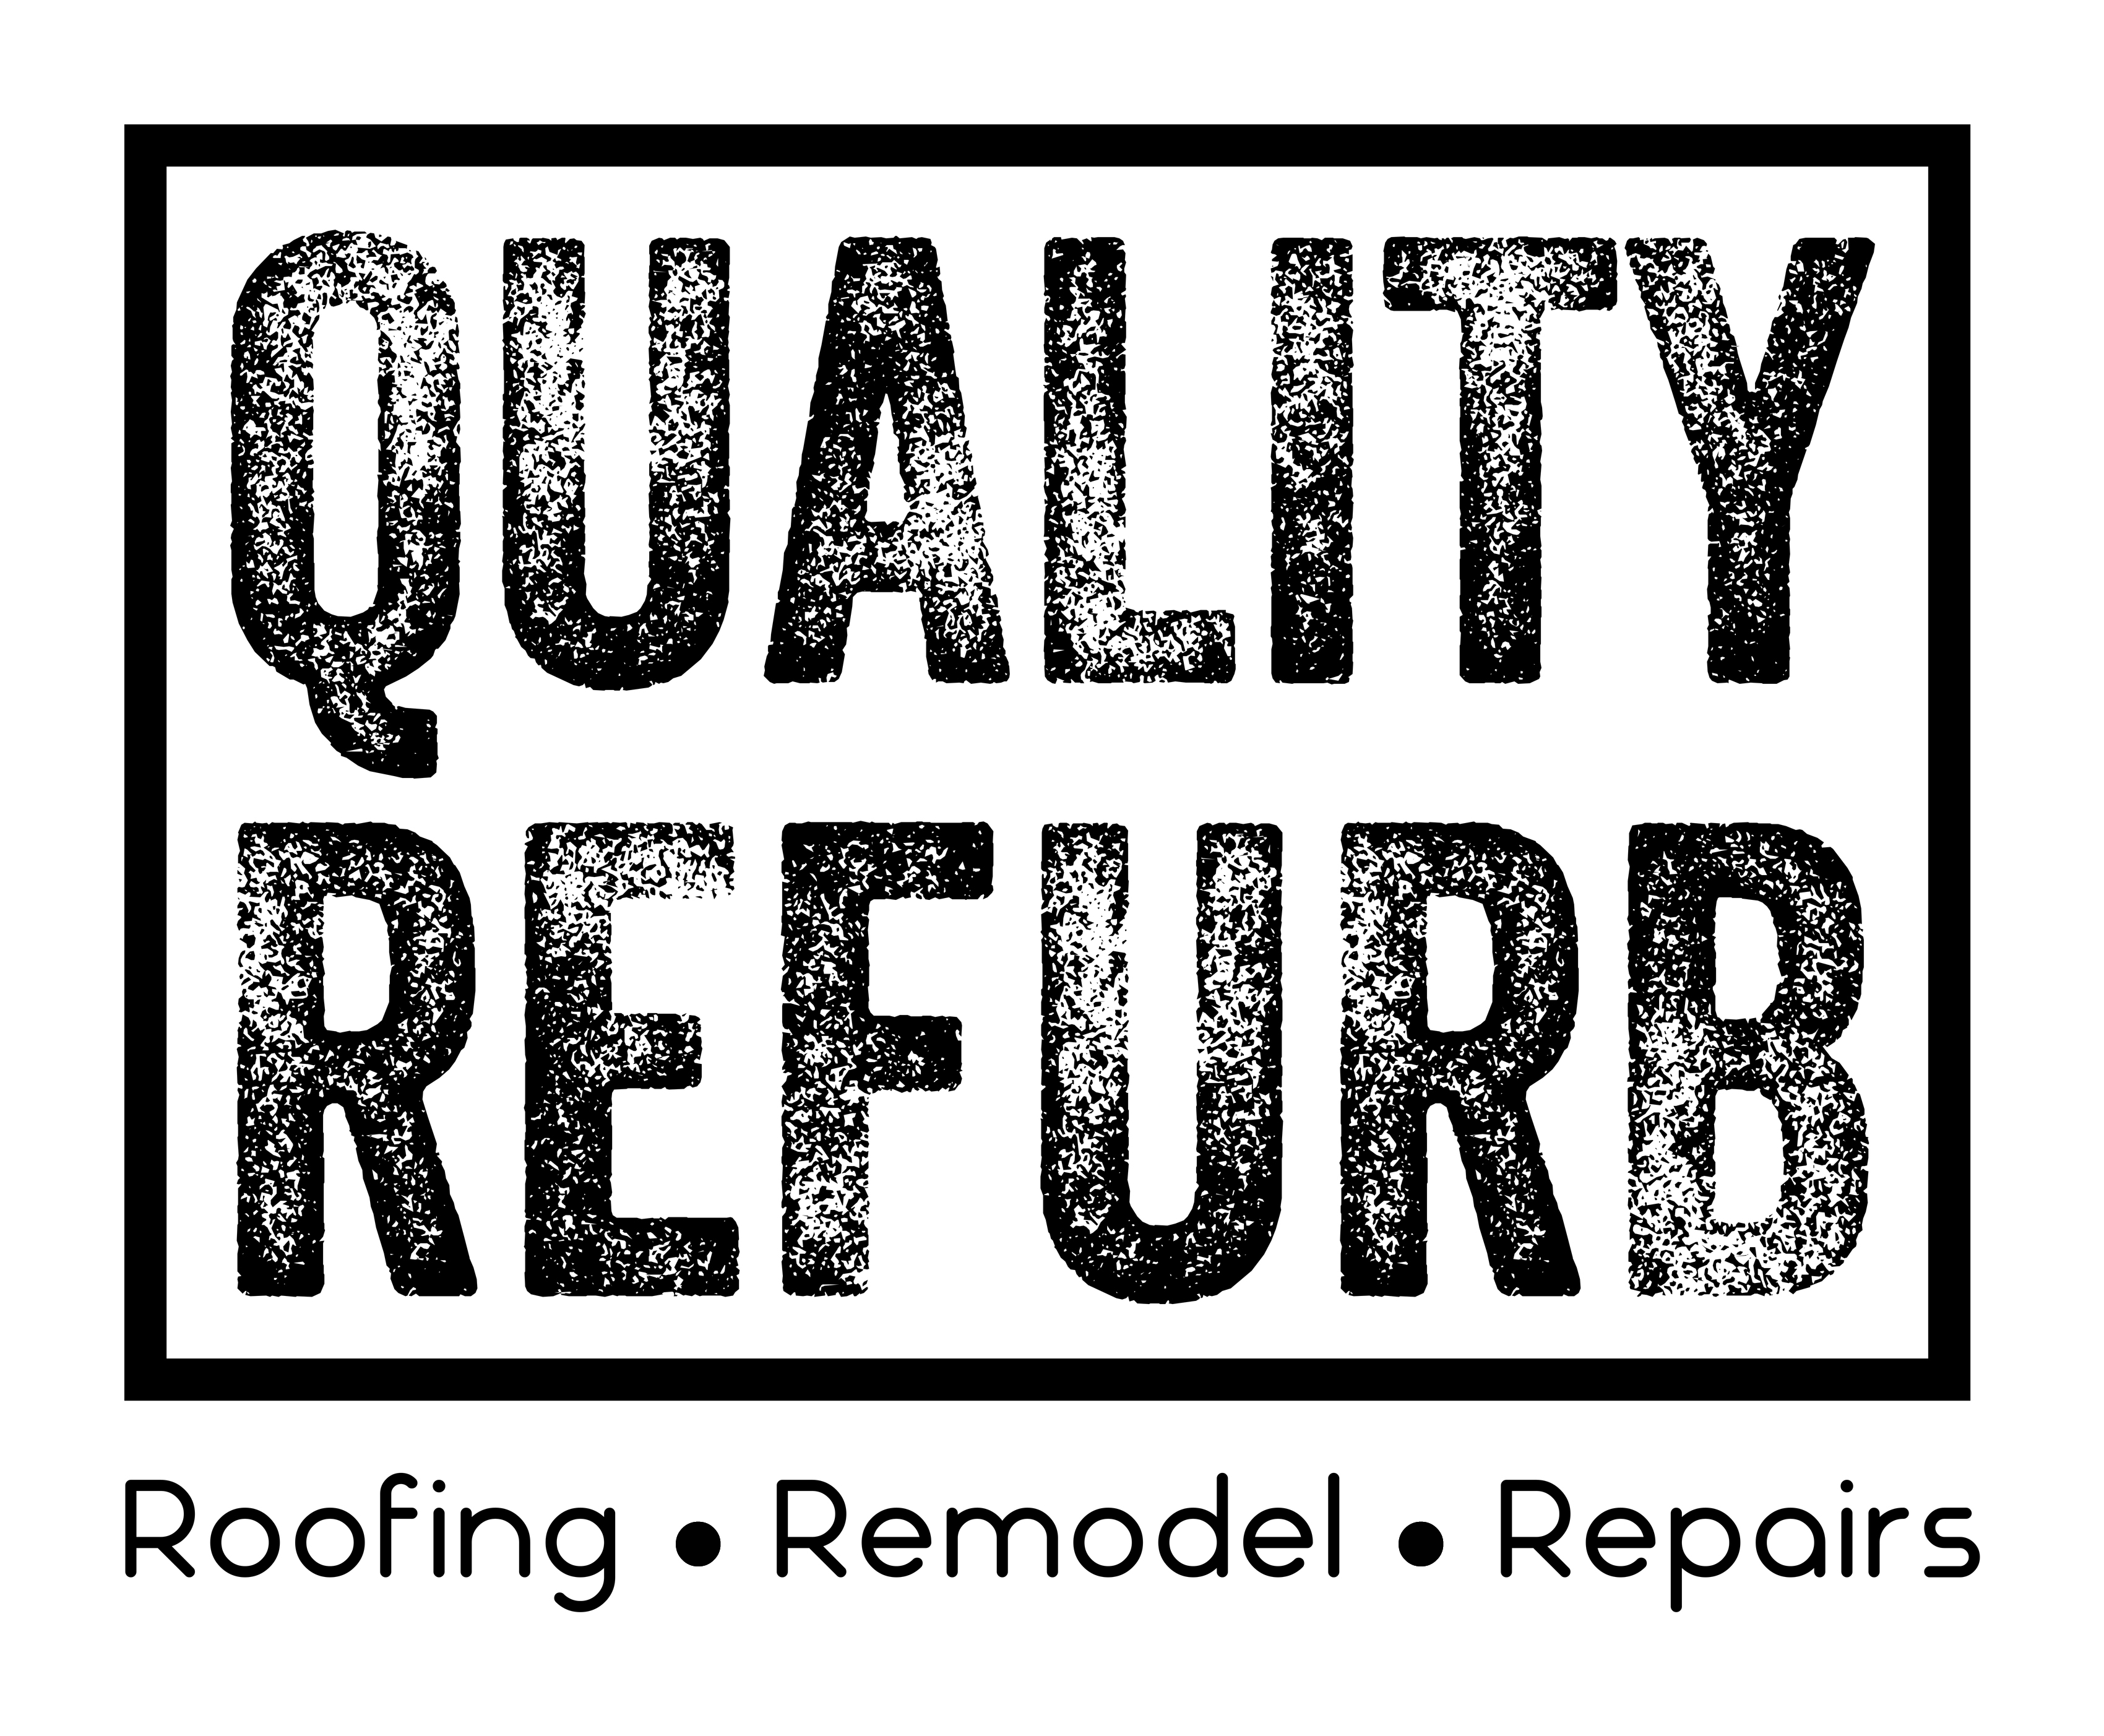 Quality Refurb Roofing Construction is a one-stop solution for roofing services in Nashville